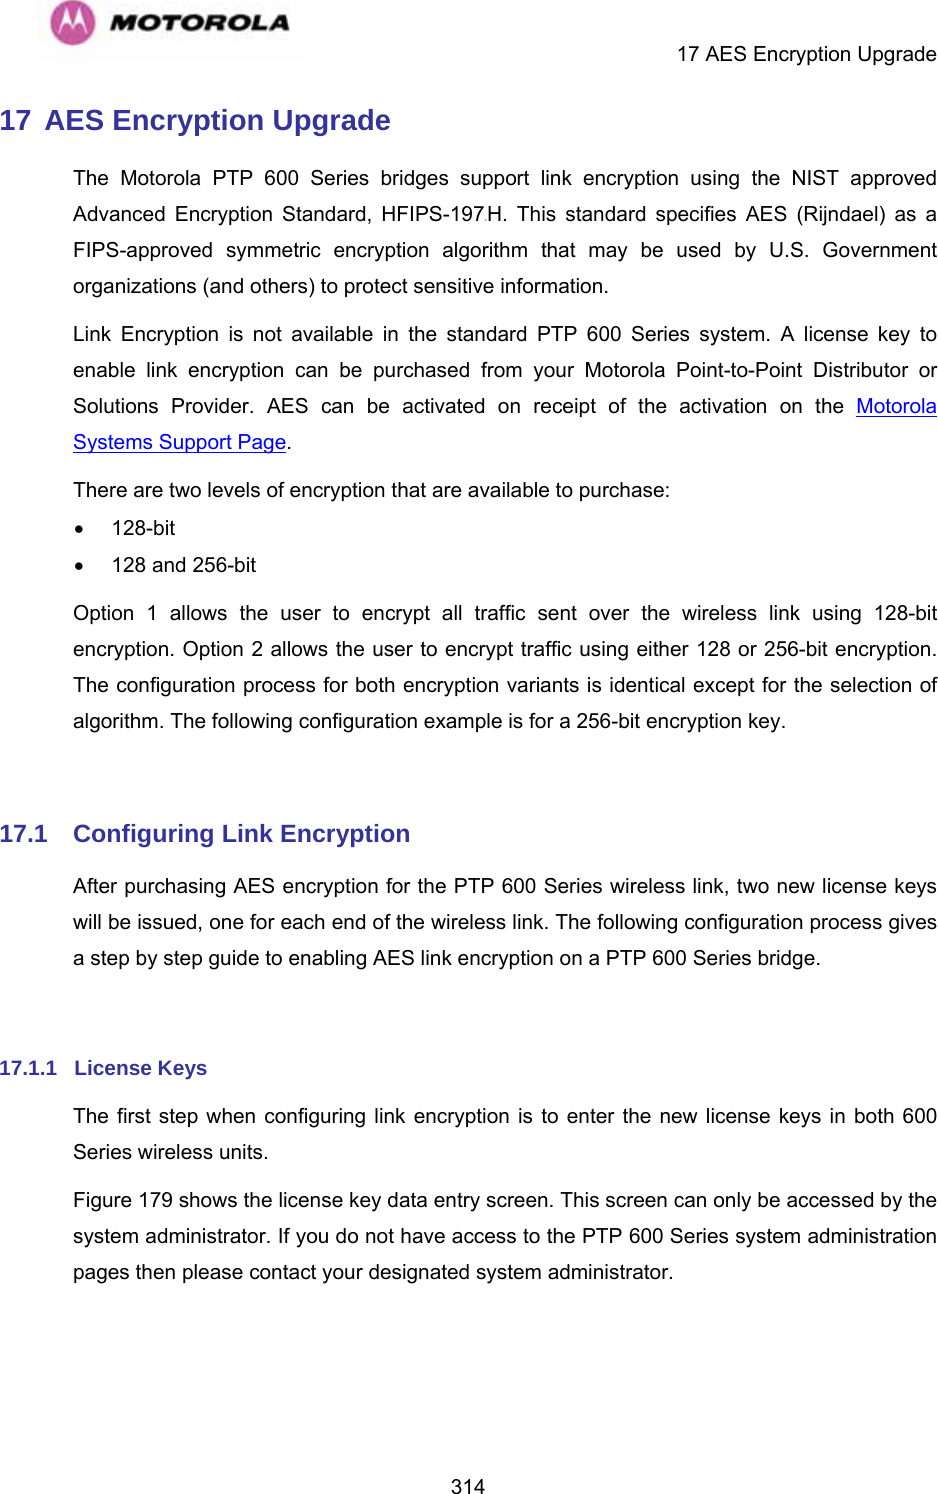     17 AES Encryption Upgrade  31417 AES Encryption Upgrade The Motorola PTP 600 Series bridges support link encryption using the NIST approved Advanced Encryption Standard, HFIPS-197UTH. This standard specifies AES (Rijndael) as a FIPS-approved symmetric encryption algorithm that may be used by U.S. Government organizations (and others) to protect sensitive information. Link Encryption is not available in the standard PTP 600 Series system. A license key to enable link encryption can be purchased from your Motorola Point-to-Point Distributor or Solutions Provider. AES can be activated on receipt of the activation on the Motorola Systems Support Page. There are two levels of encryption that are available to purchase: • 128-bit •  128 and 256-bit Option 1 allows the user to encrypt all traffic sent over the wireless link using 128-bit encryption. Option 2 allows the user to encrypt traffic using either 128 or 256-bit encryption. The configuration process for both encryption variants is identical except for the selection of algorithm. The following configuration example is for a 256-bit encryption key.  17.1  Configuring Link Encryption After purchasing AES encryption for the PTP 600 Series wireless link, two new license keys will be issued, one for each end of the wireless link. The following configuration process gives a step by step guide to enabling AES link encryption on a PTP 600 Series bridge.  17.1.1  License Keys The first step when configuring link encryption is to enter the new license keys in both 600 Series wireless units. Figure 179 shows the license key data entry screen. This screen can only be accessed by the system administrator. If you do not have access to the PTP 600 Series system administration pages then please contact your designated system administrator.  